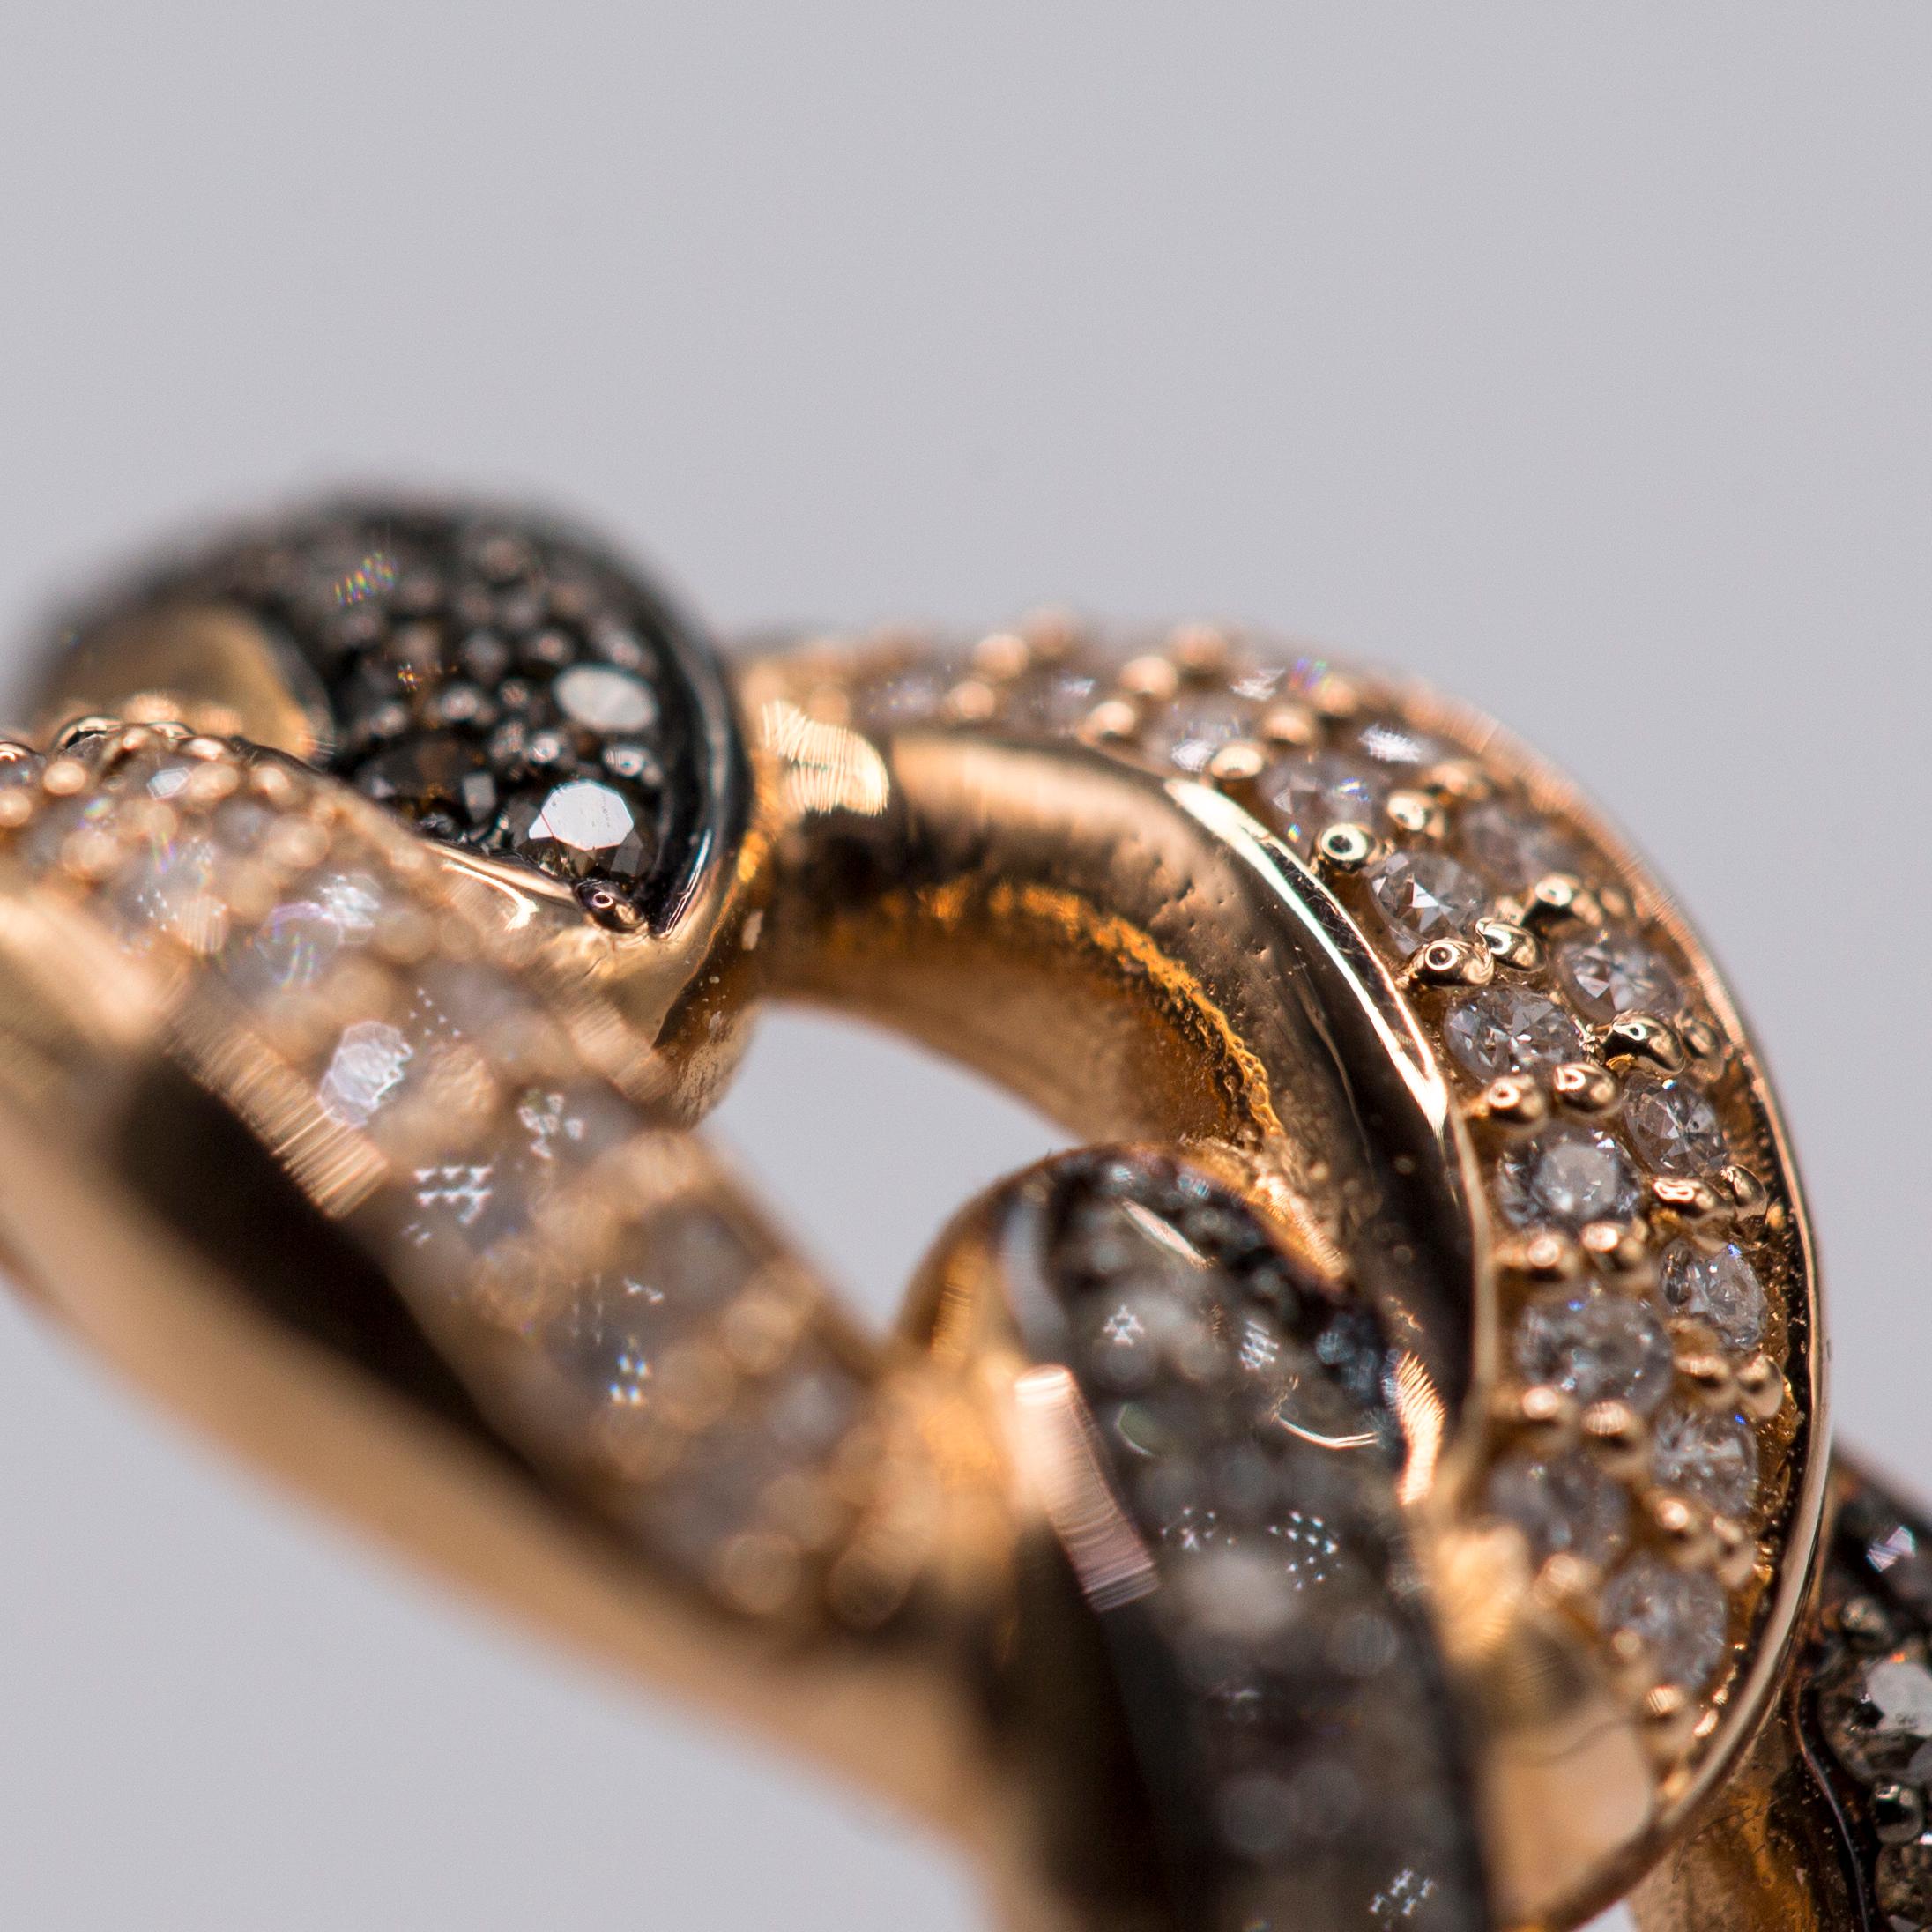 14k rose gold woven band cocktail ring with white diamonds weighing 0.18ct total and black diamonds weighing 0.34ct total weight.

